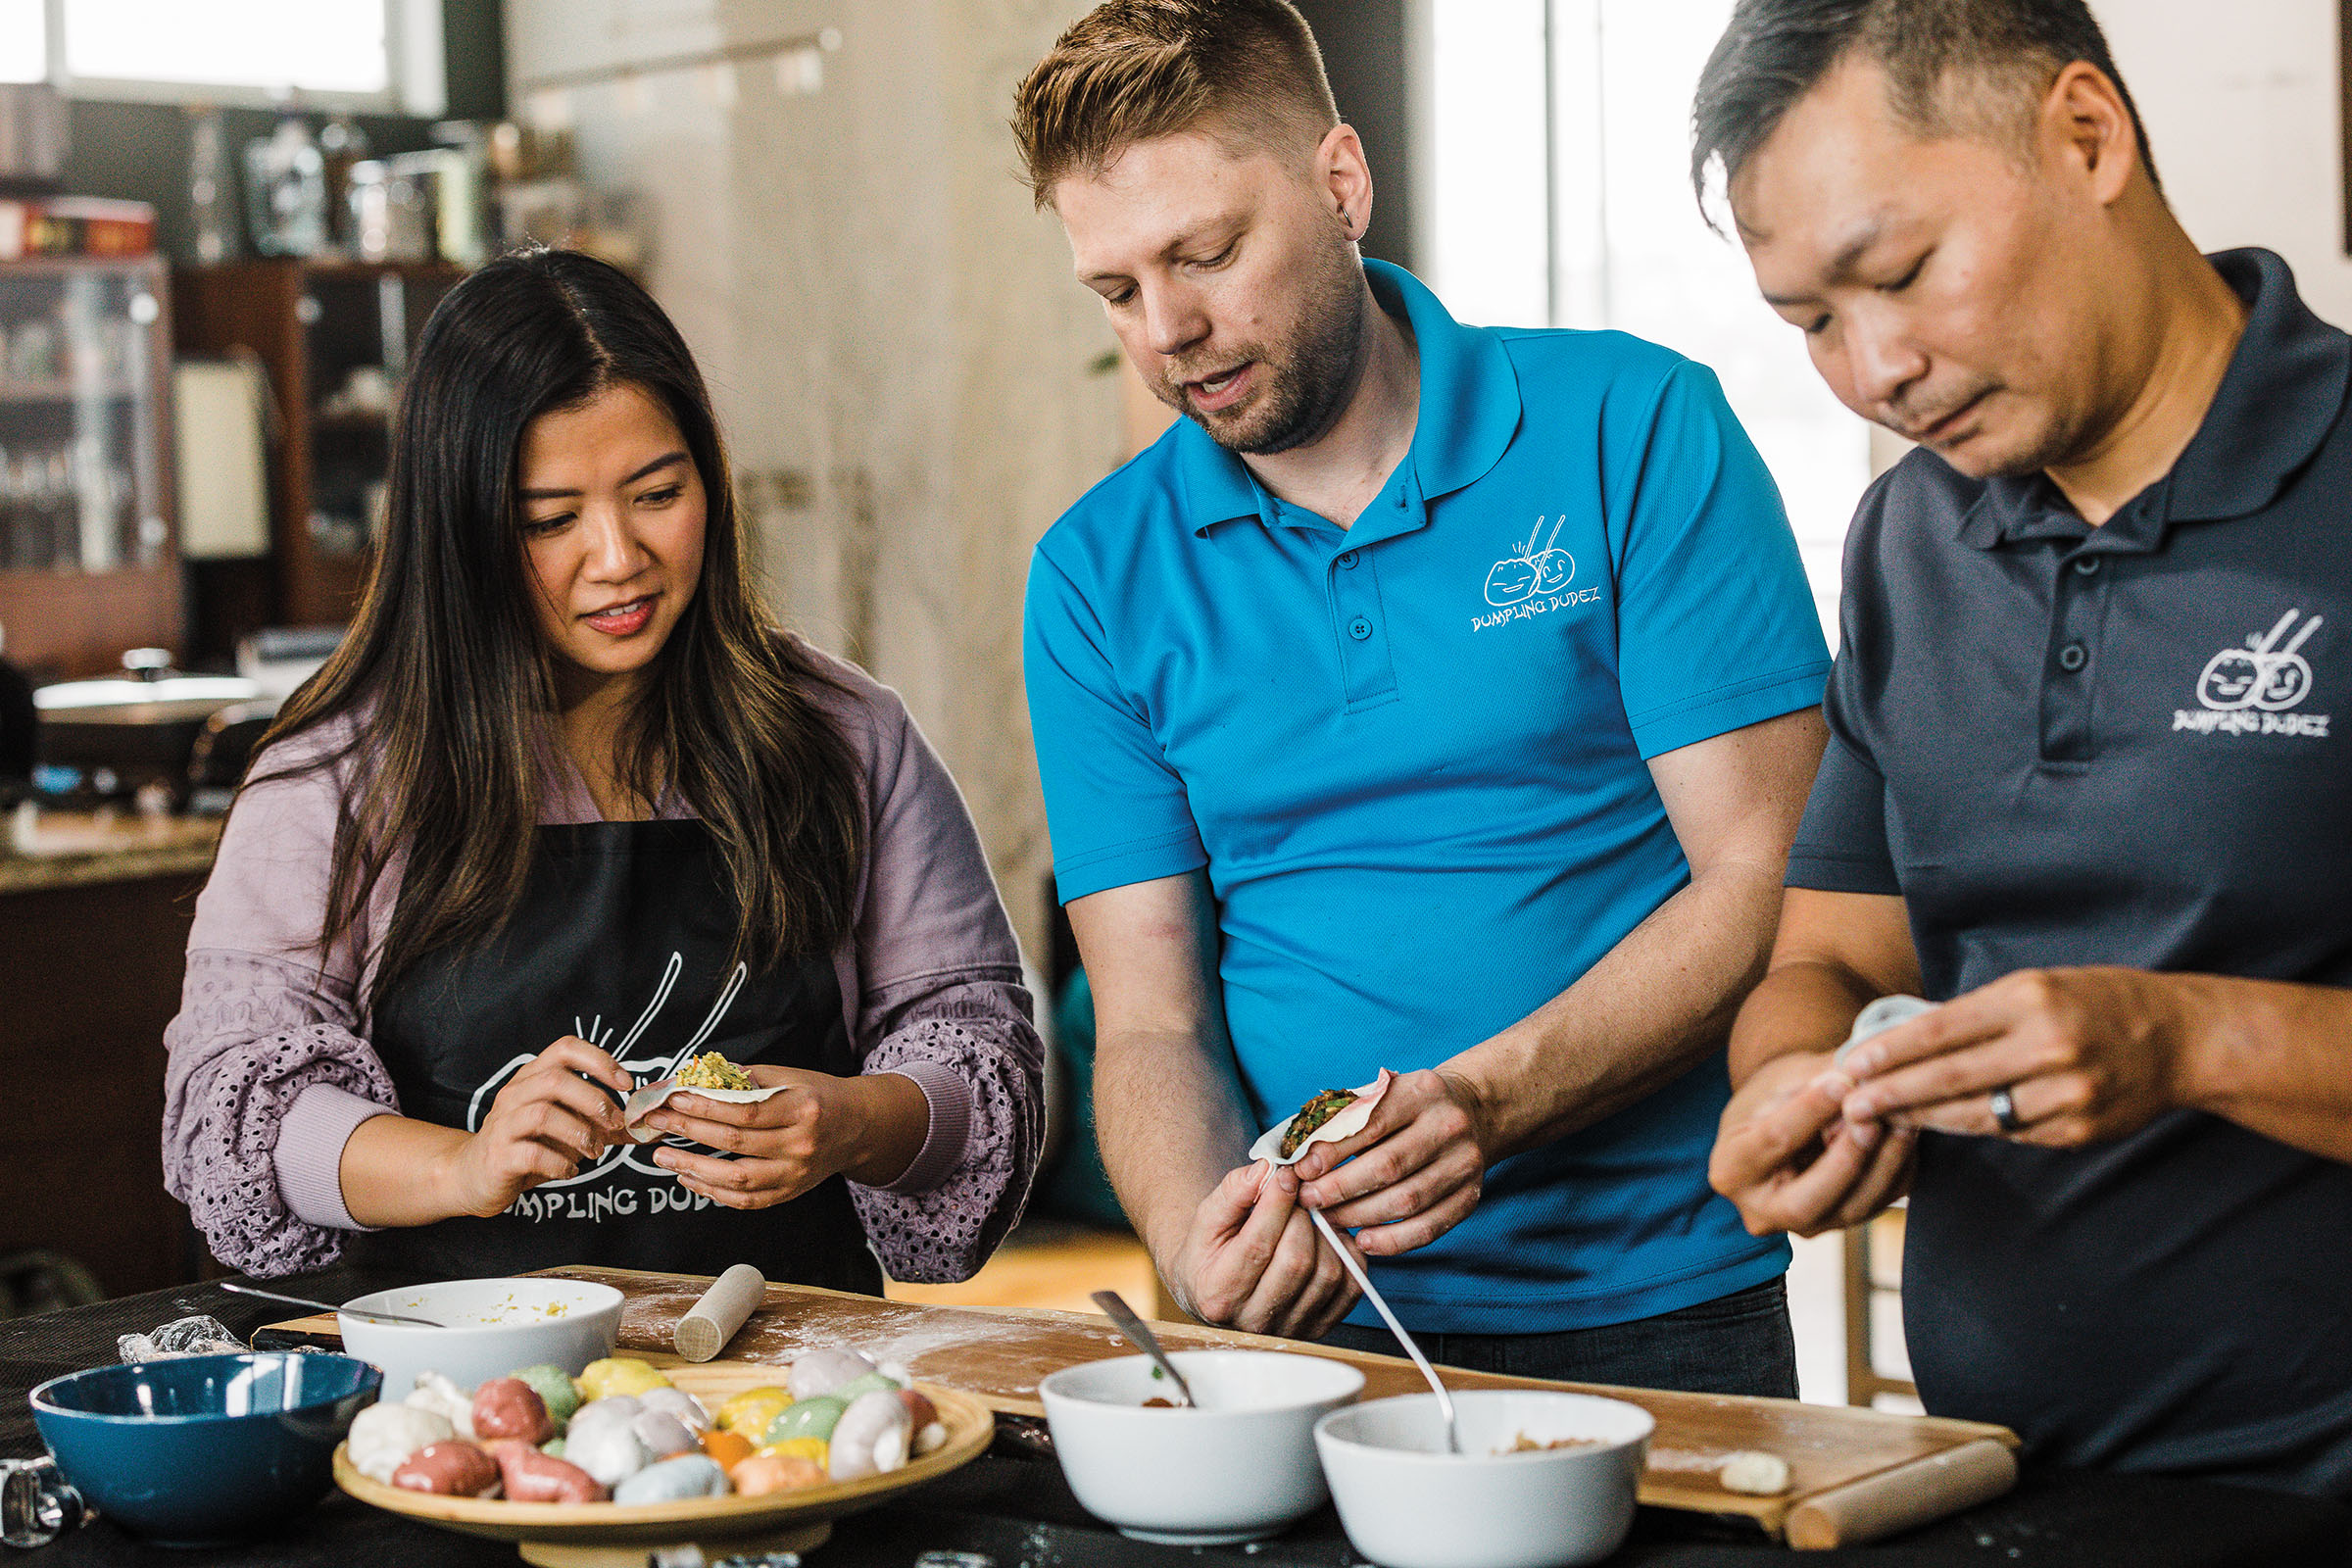 Three people stand at a table carefully filling dumplings from white bowls of various ingredients